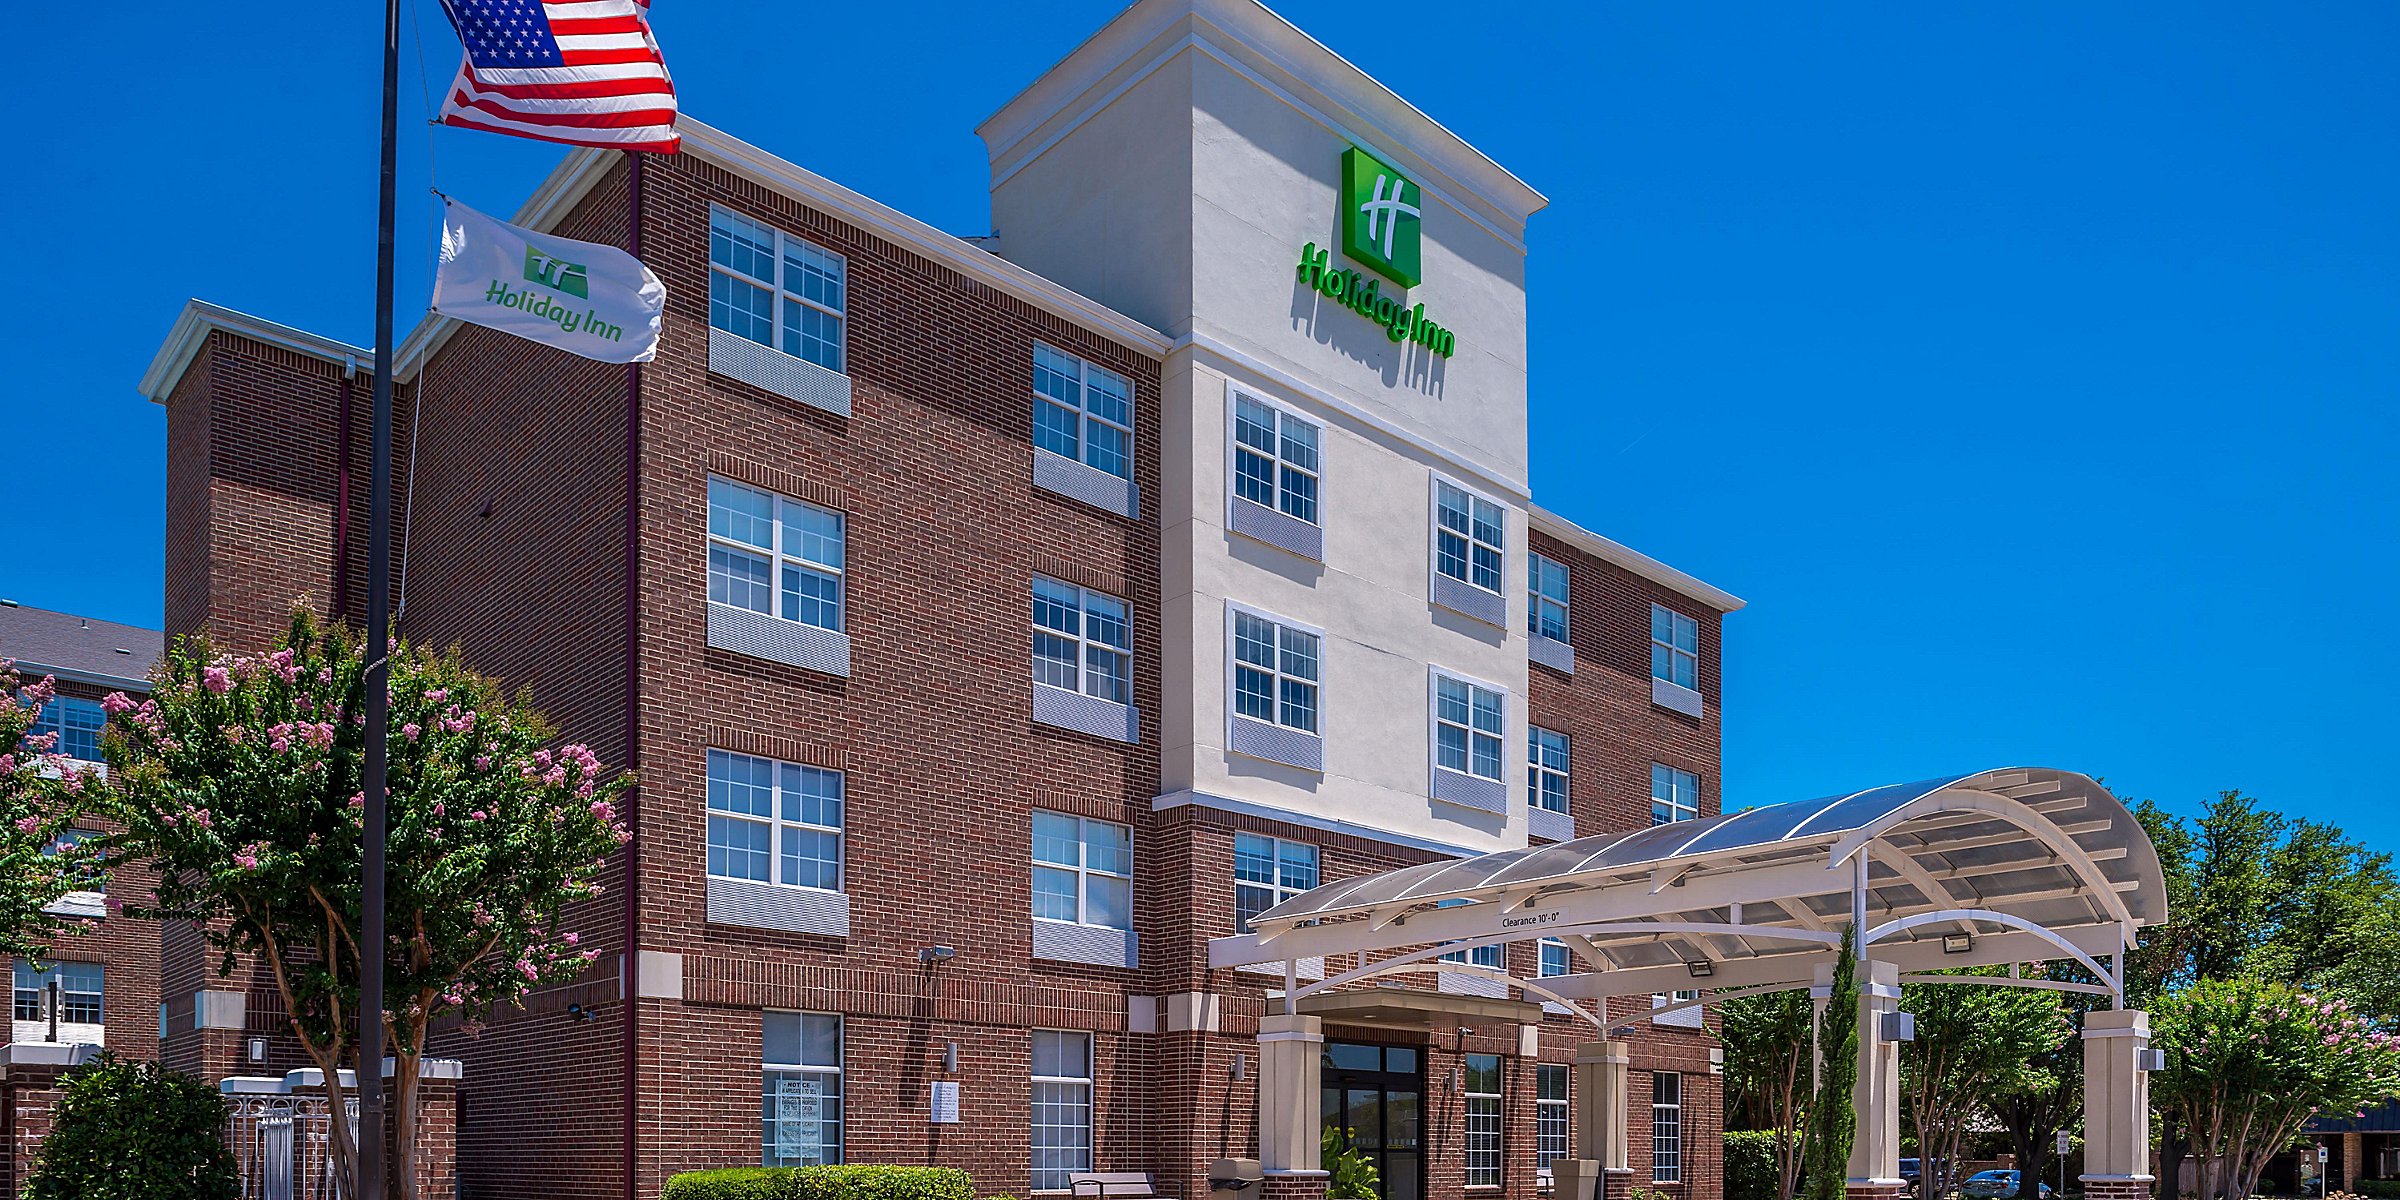 North Dallas Hotels In Addison Tx Holiday Inn Hotel Suites